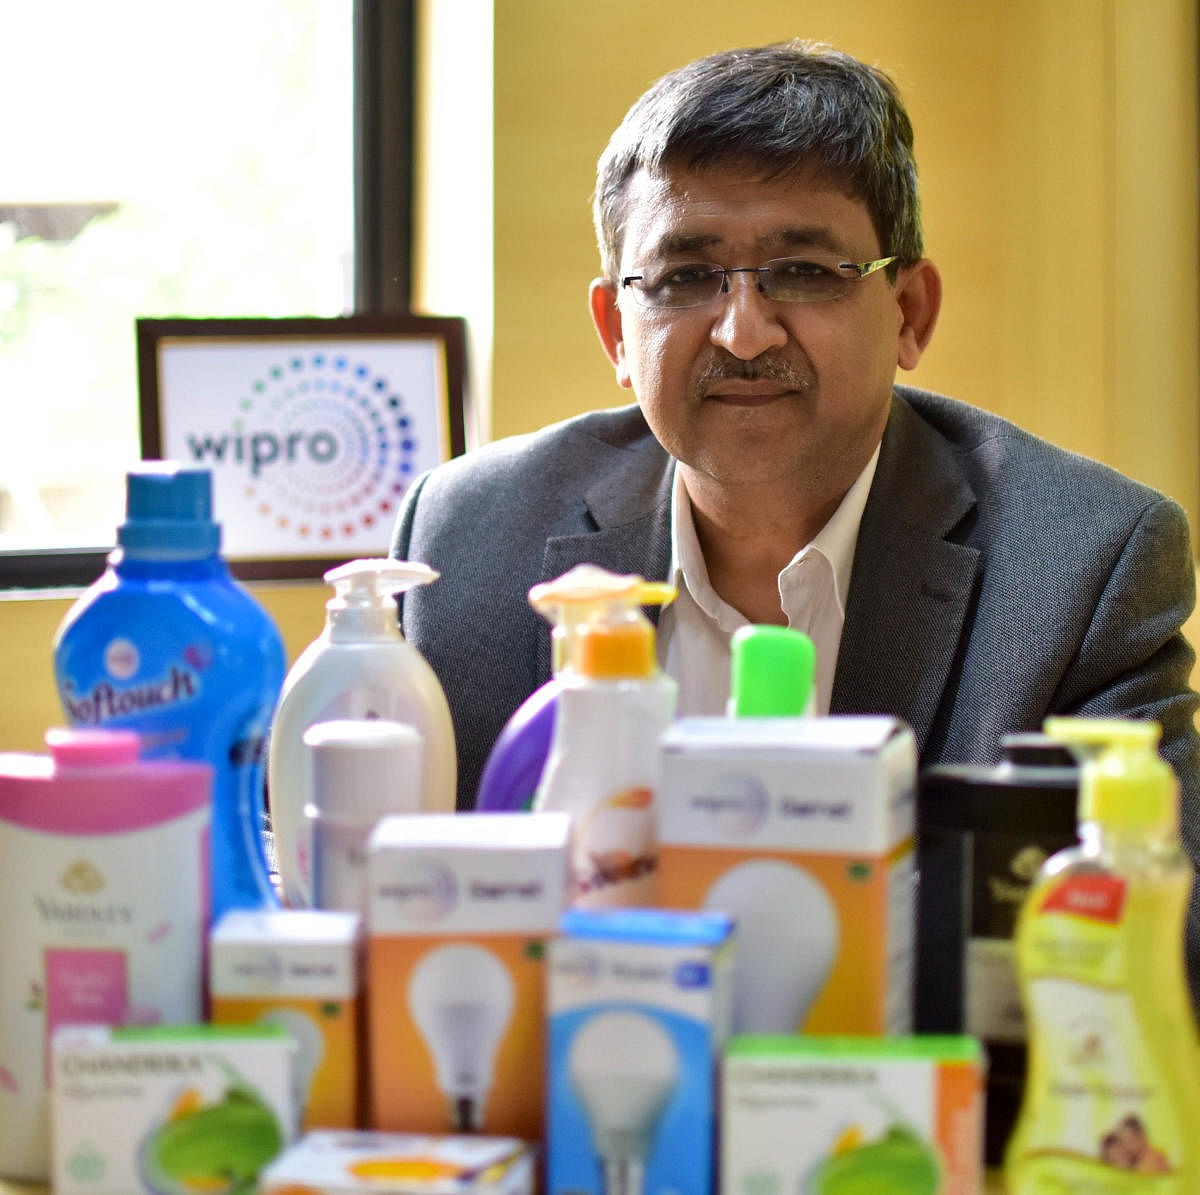 Vineet Agrawal displays the ranhe of Wipro's consumer care and lighting products. DH Photo by B H Shivakumar